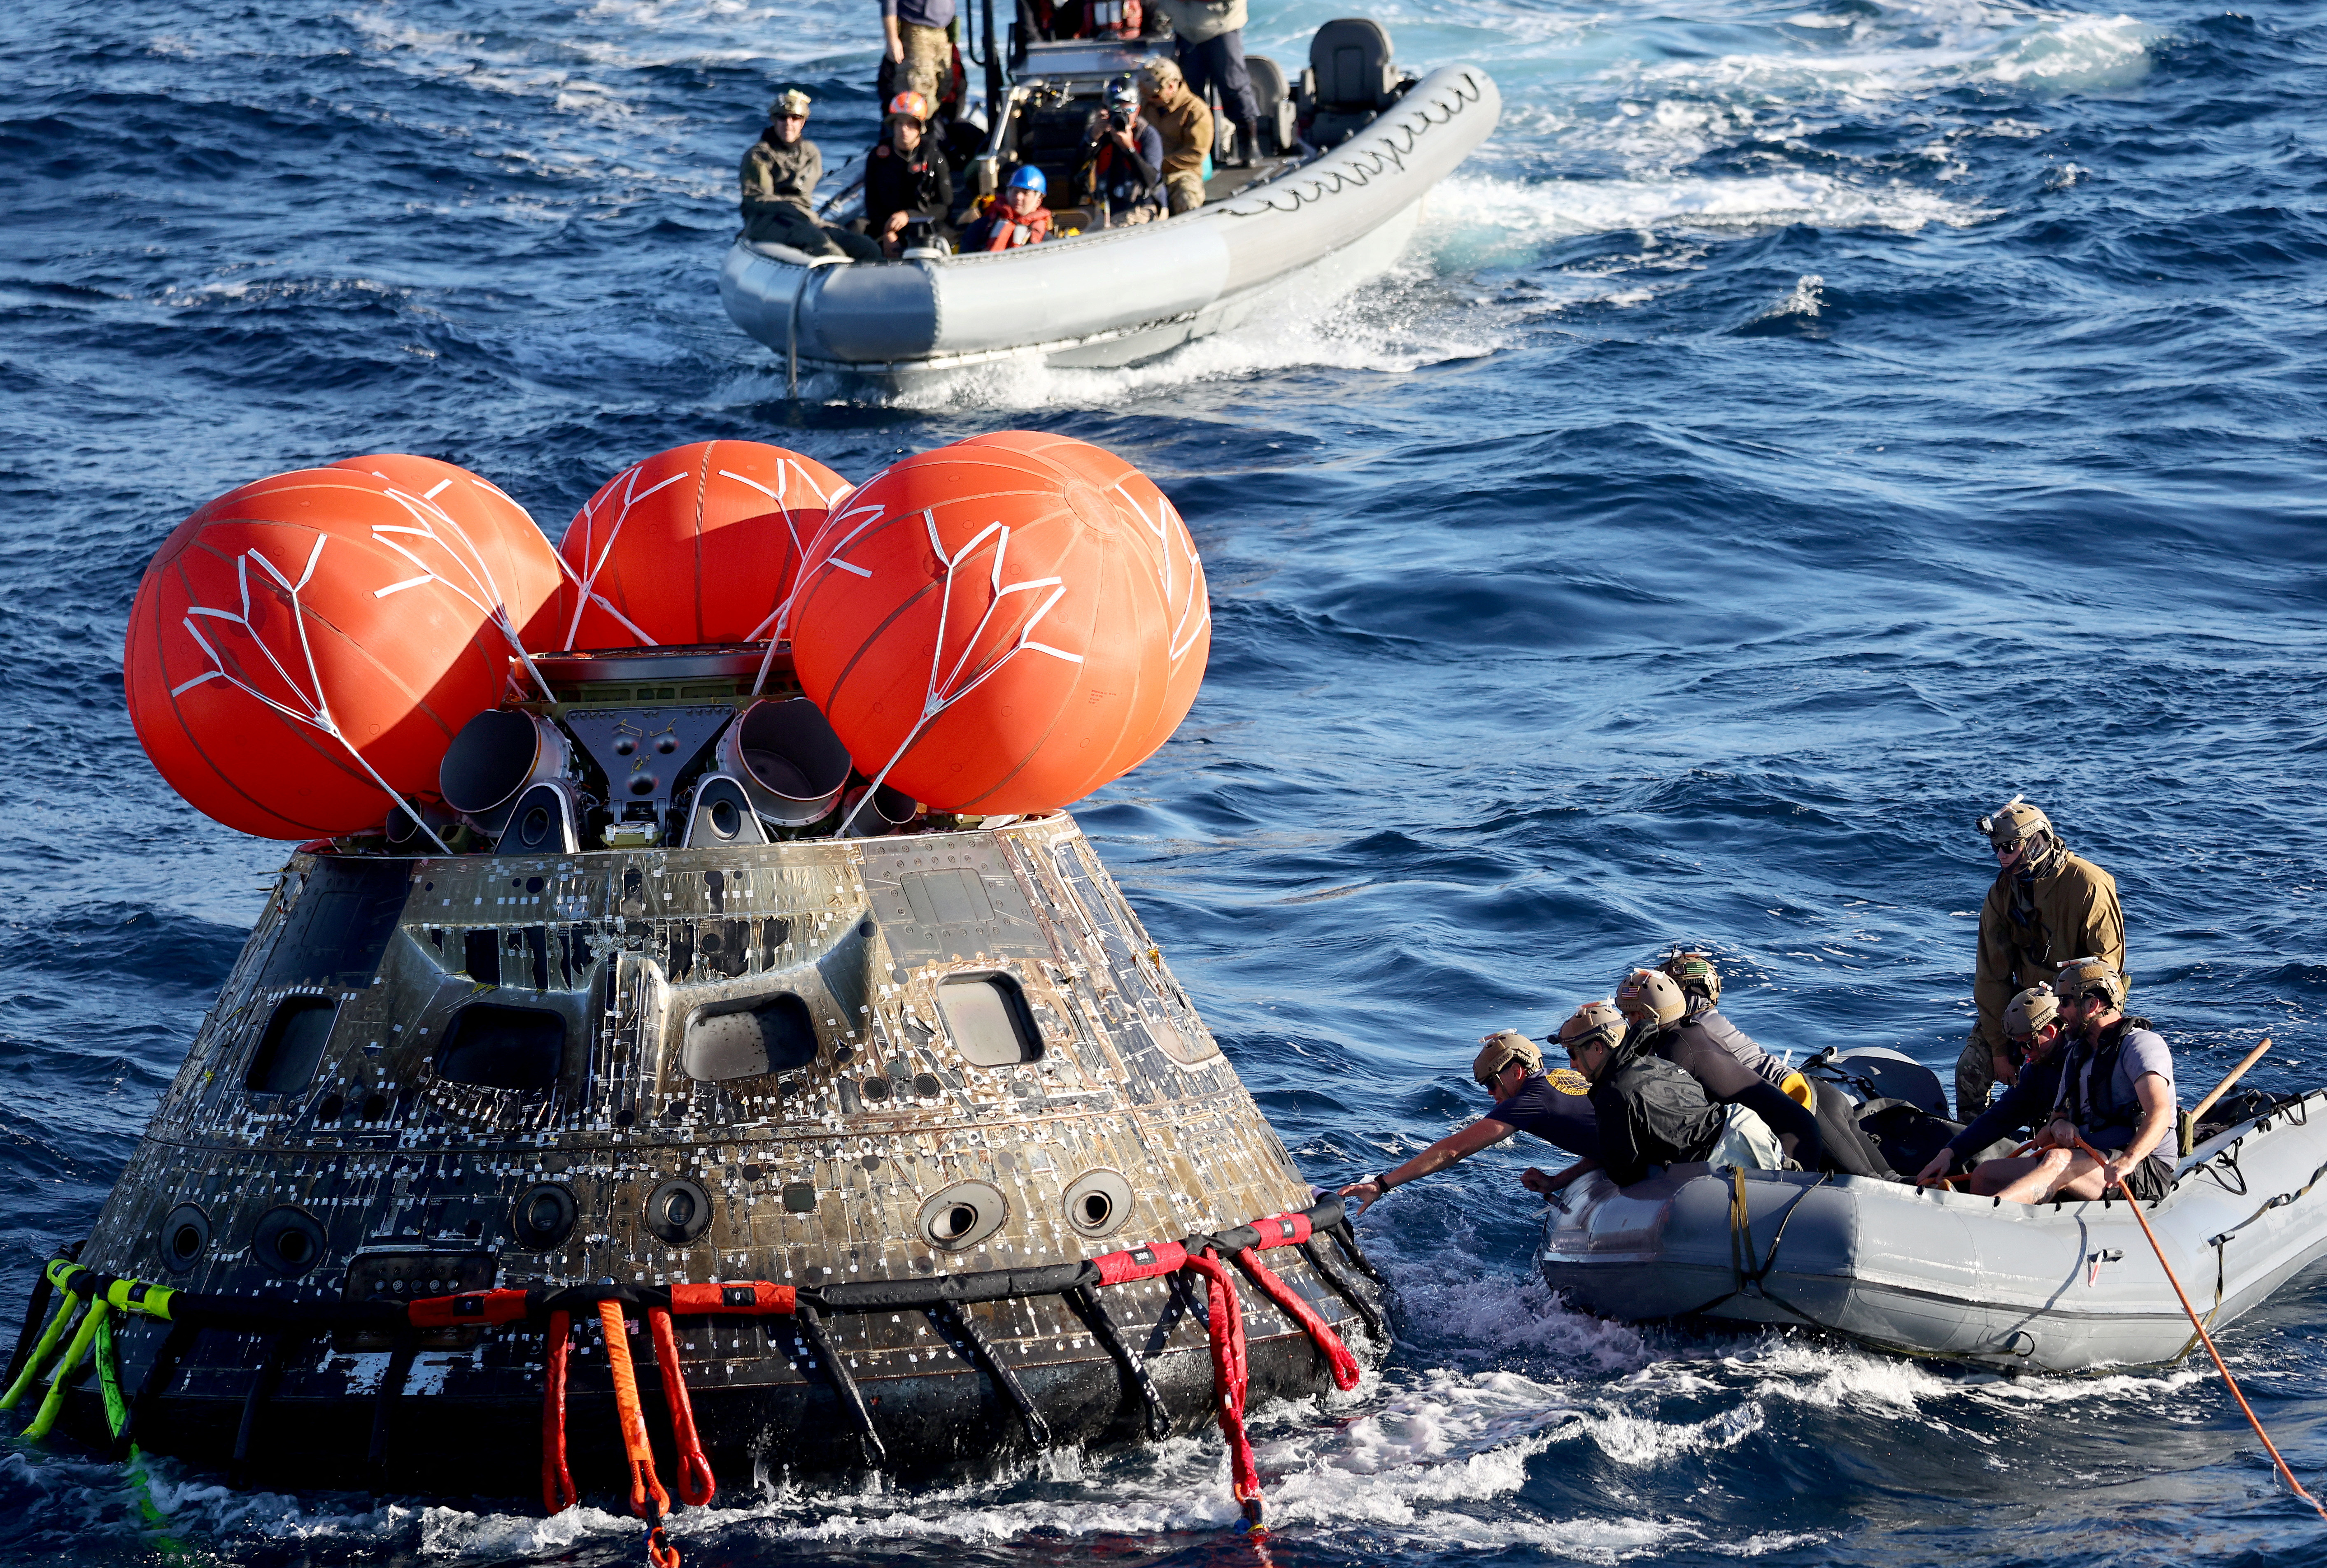 U.S. Navy divers protect NASA's Orion capsule during recovery operations after the successful Artemis I lunar mission (REUTERS via Mario Dama/Poole).